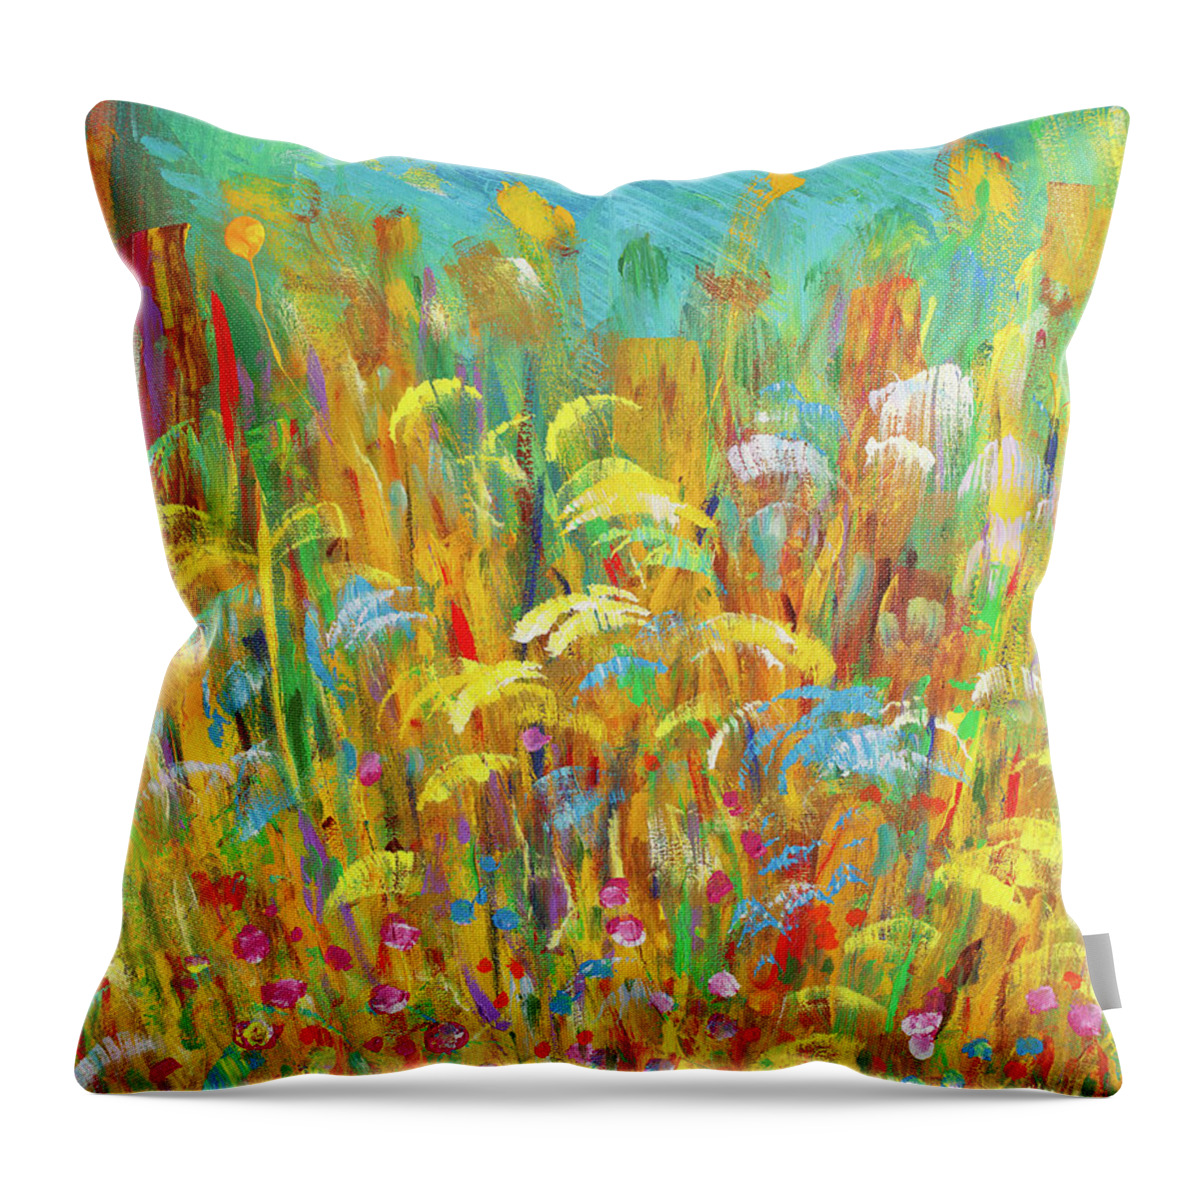 Wildflowers Throw Pillow featuring the painting Wildflowers by Bjorn Sjogren